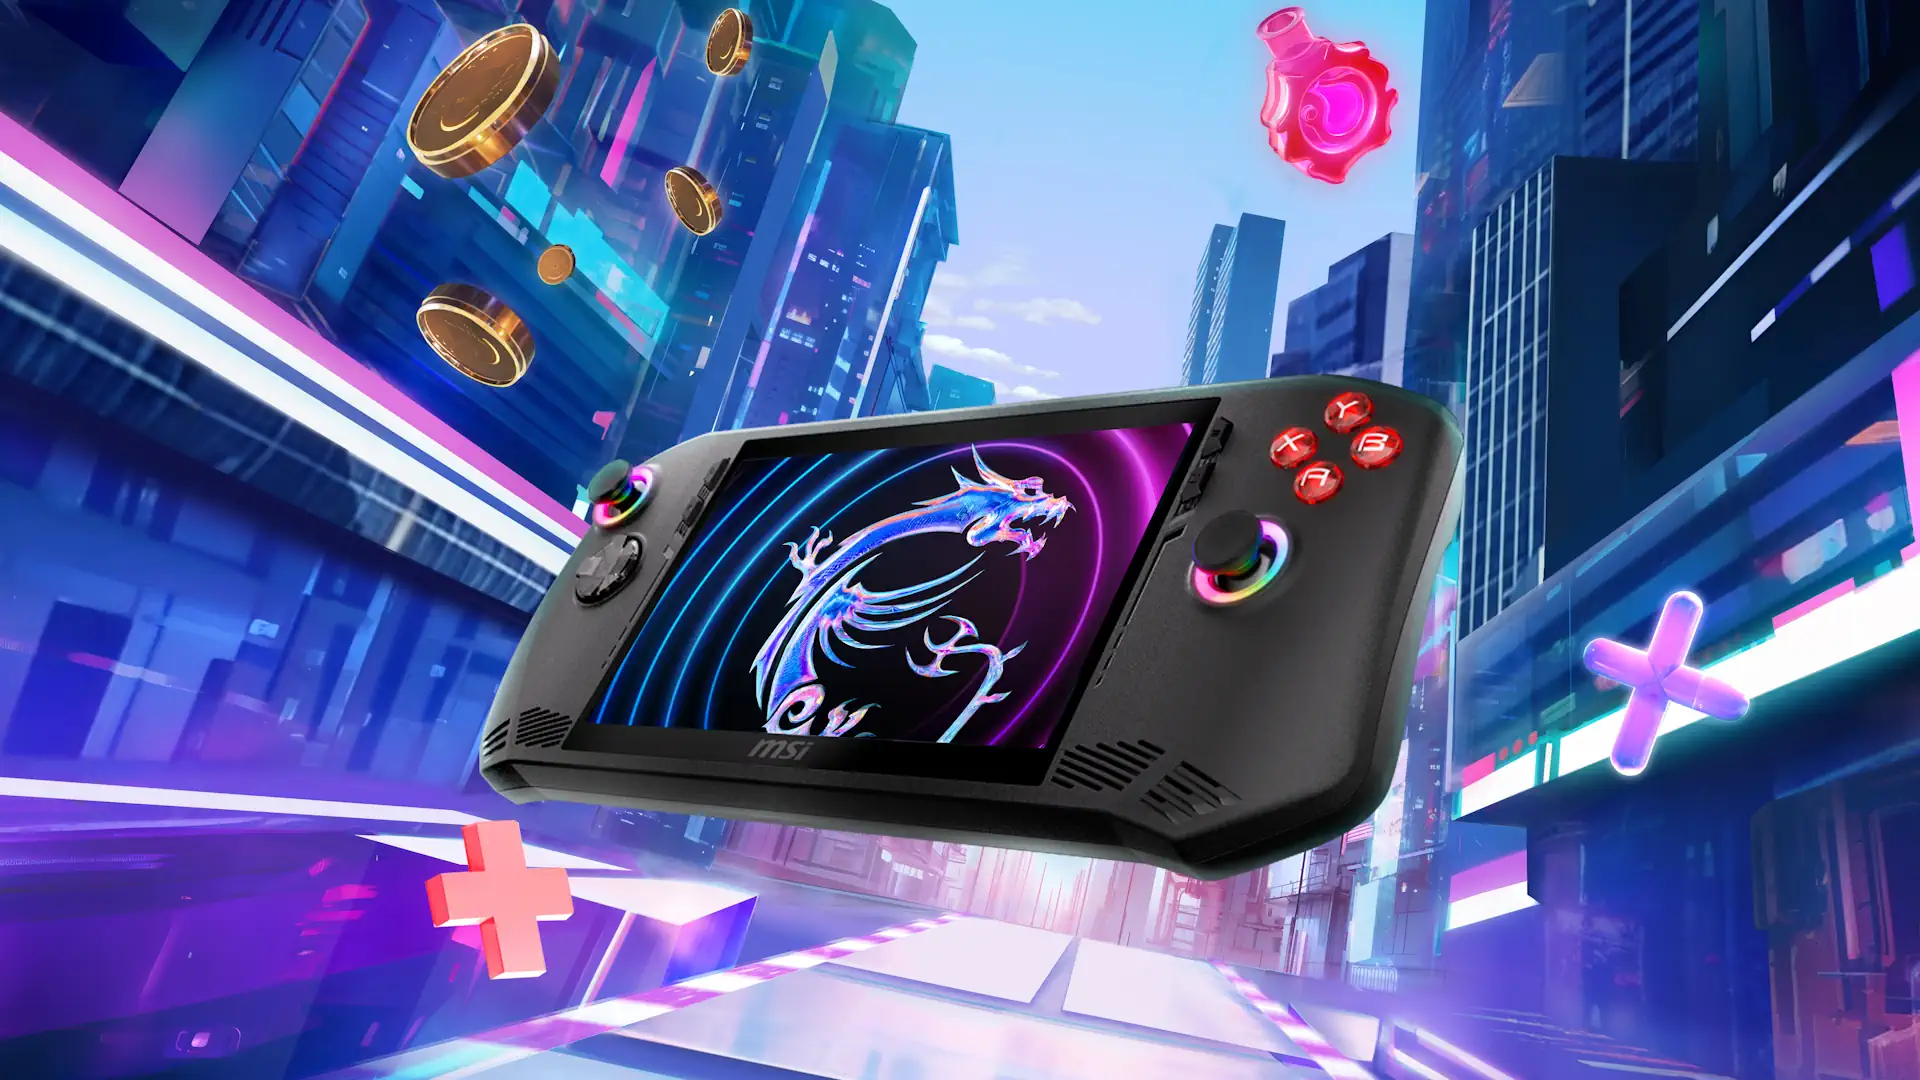 The MSI Claw is the world’s first handheld console powered by an Intel Core Ultra processor